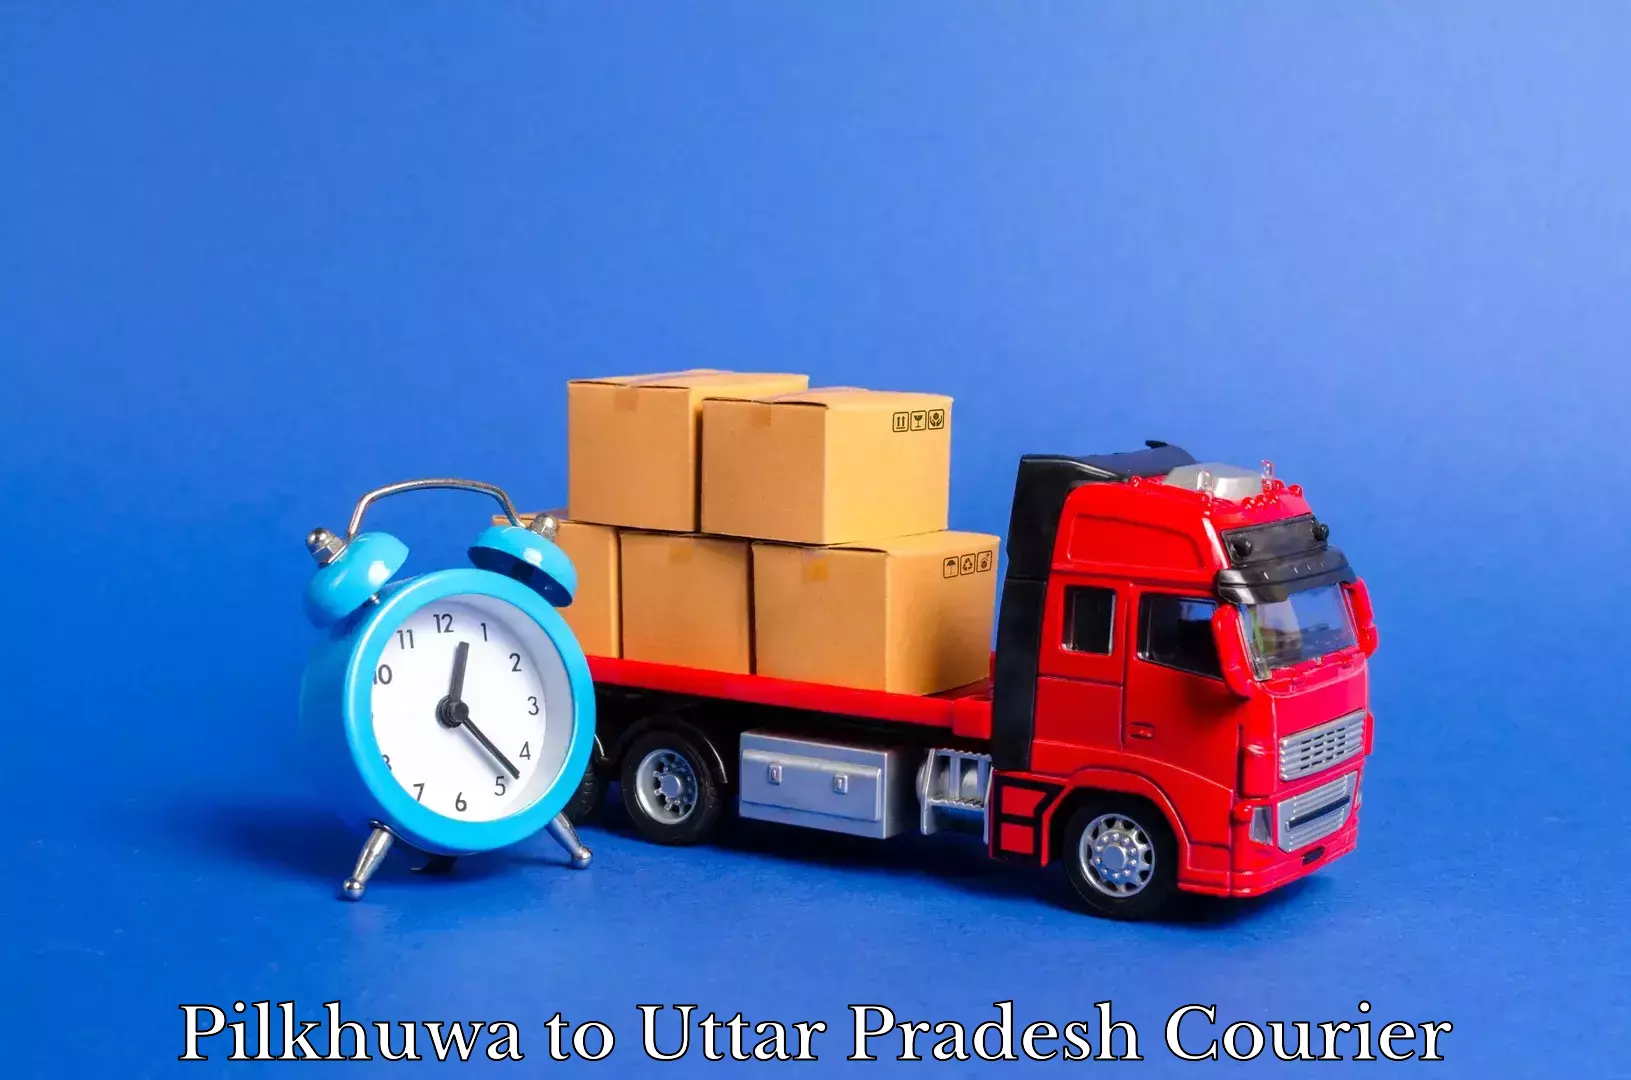 Trusted relocation services Pilkhuwa to Uttar Pradesh